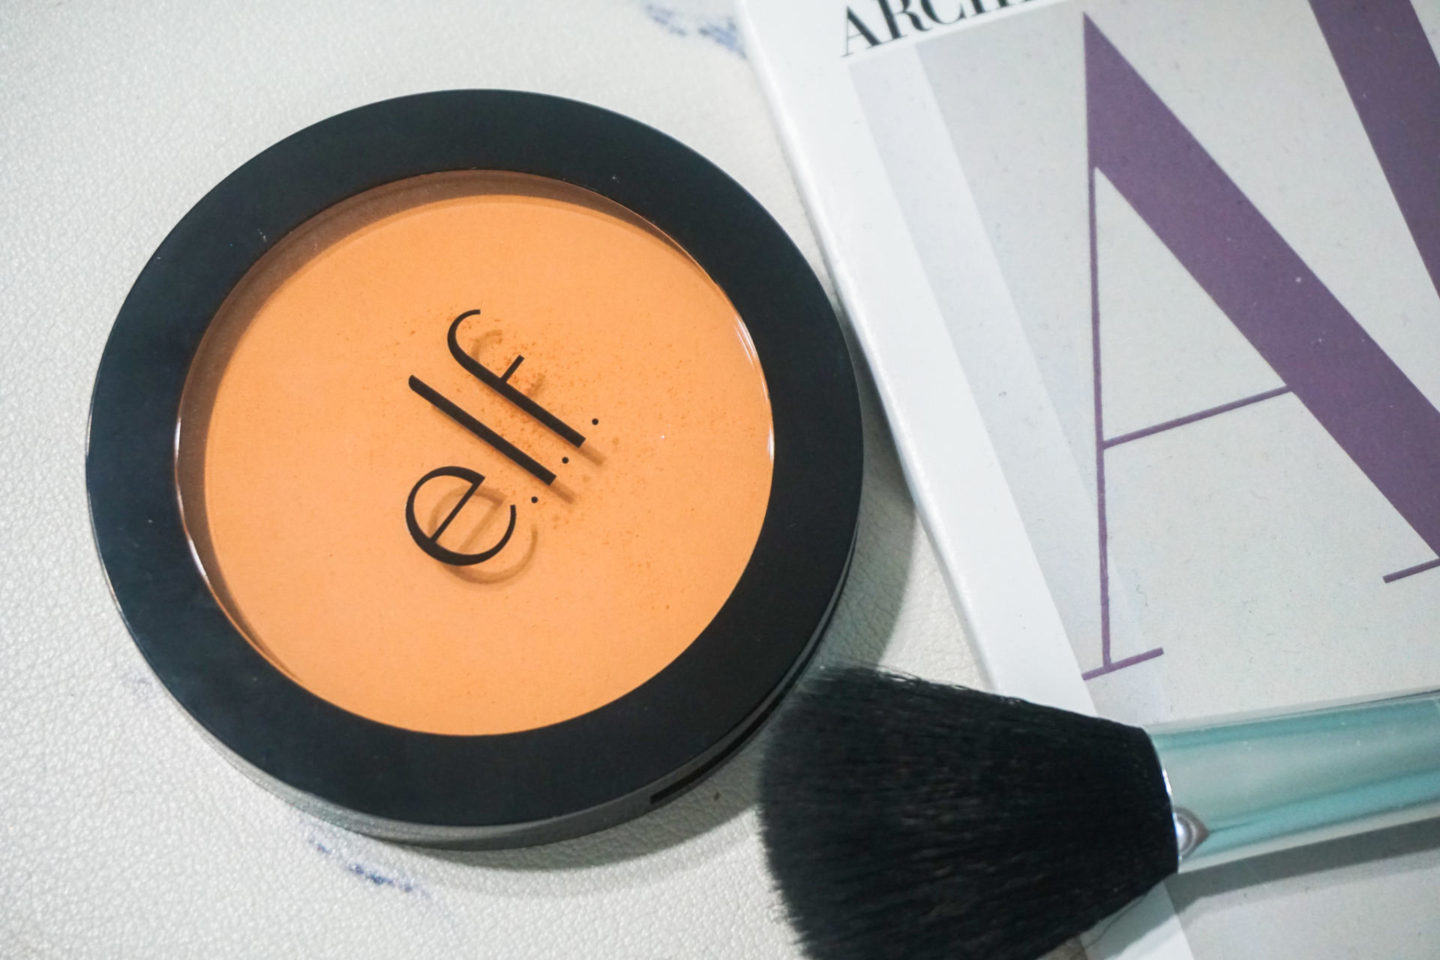 Beauty Pick of the Month: e.l.f Primer-Infused Blush